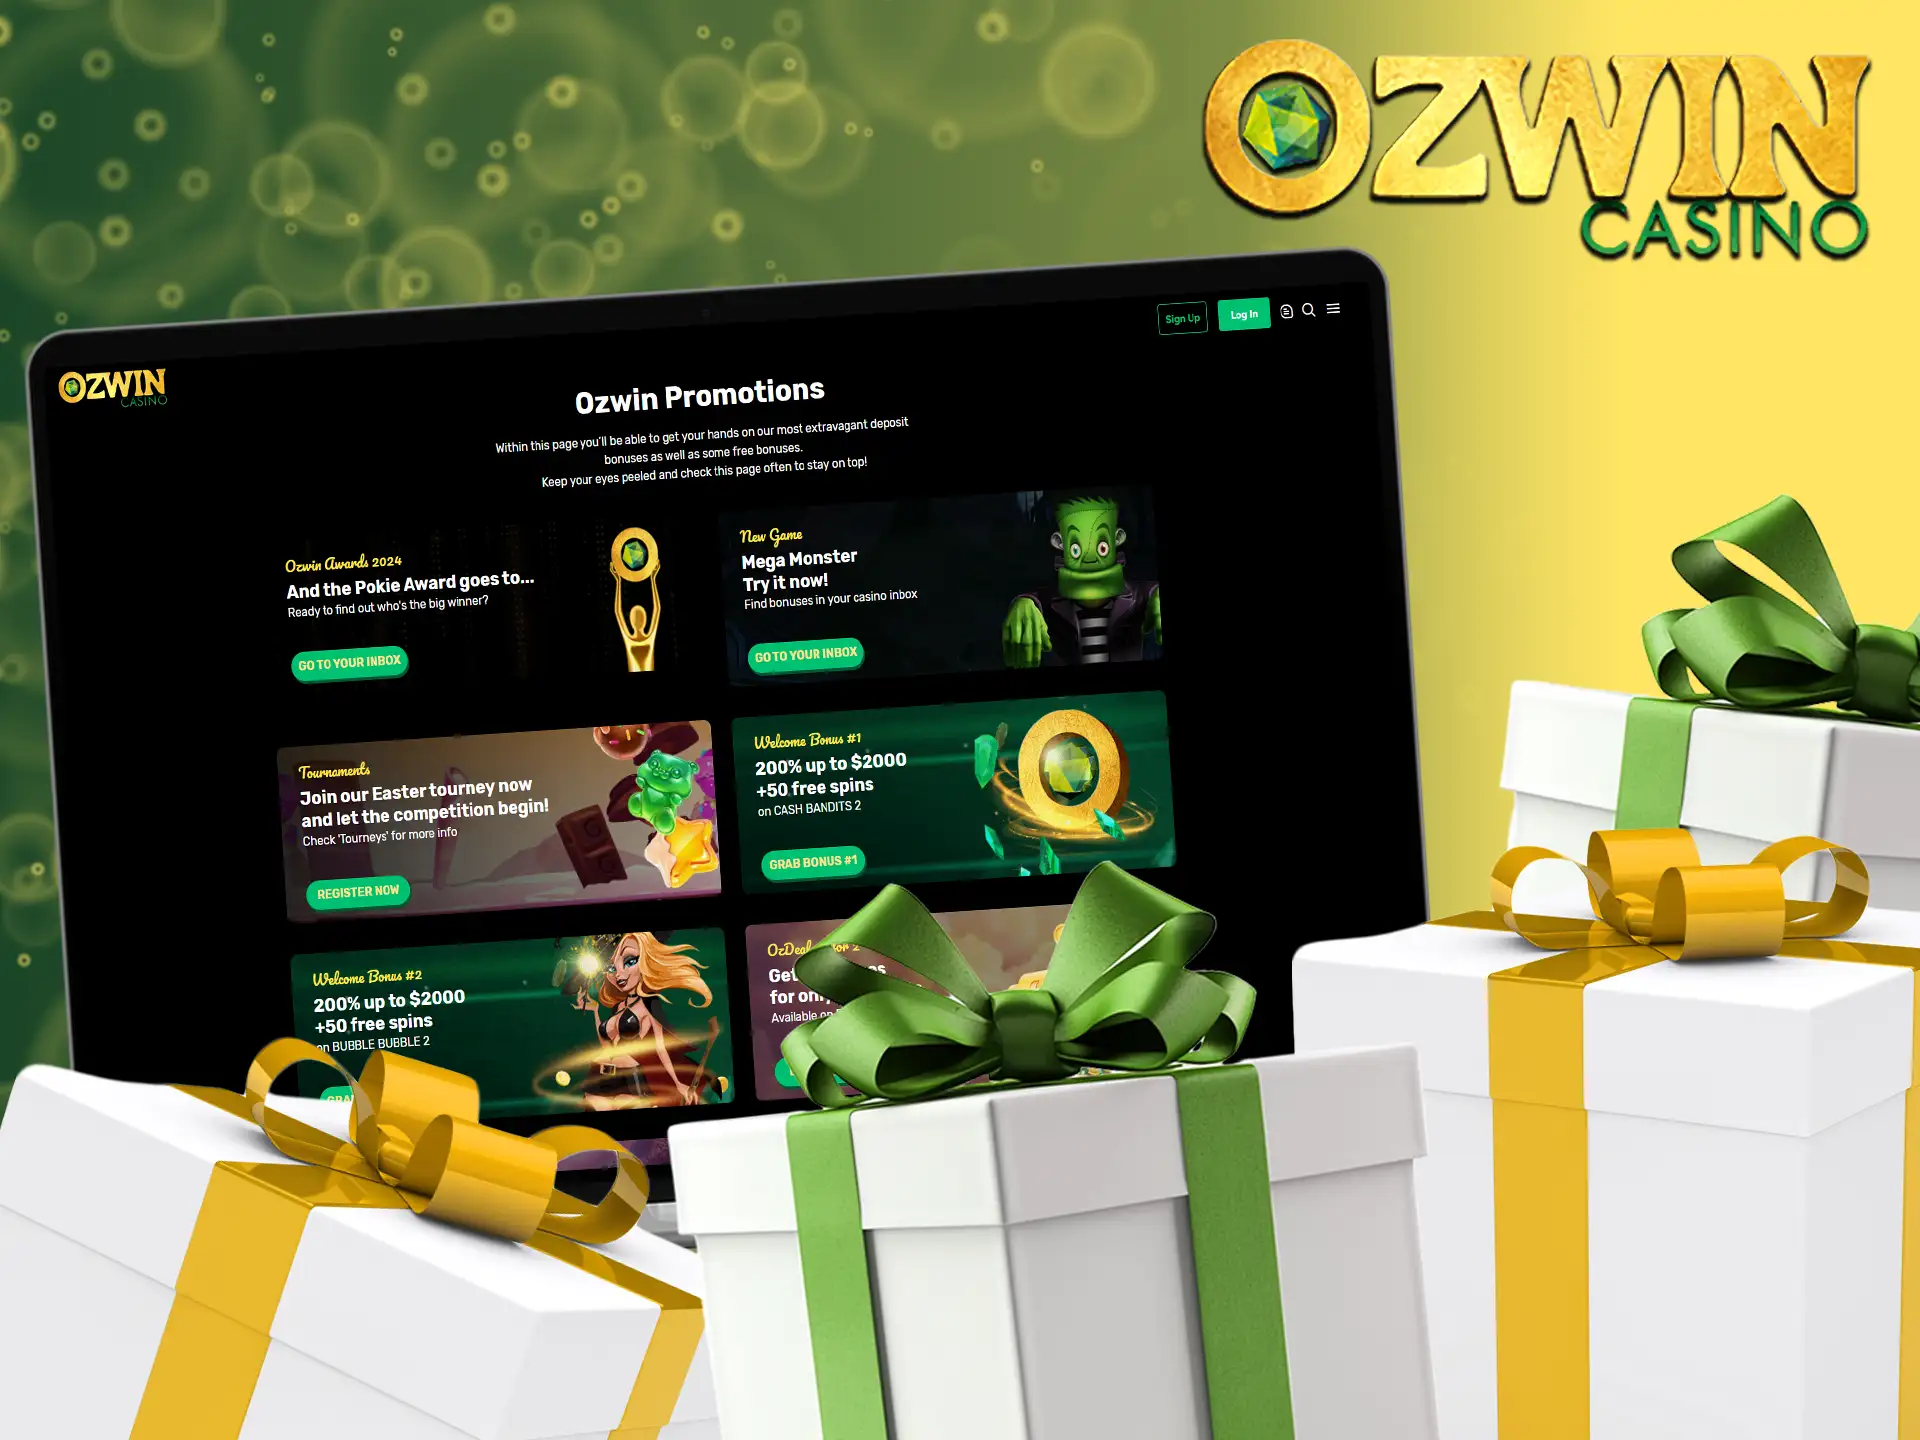 Ozwin Casino offers registration bonuses for Australian gamblers to play games in various categories.